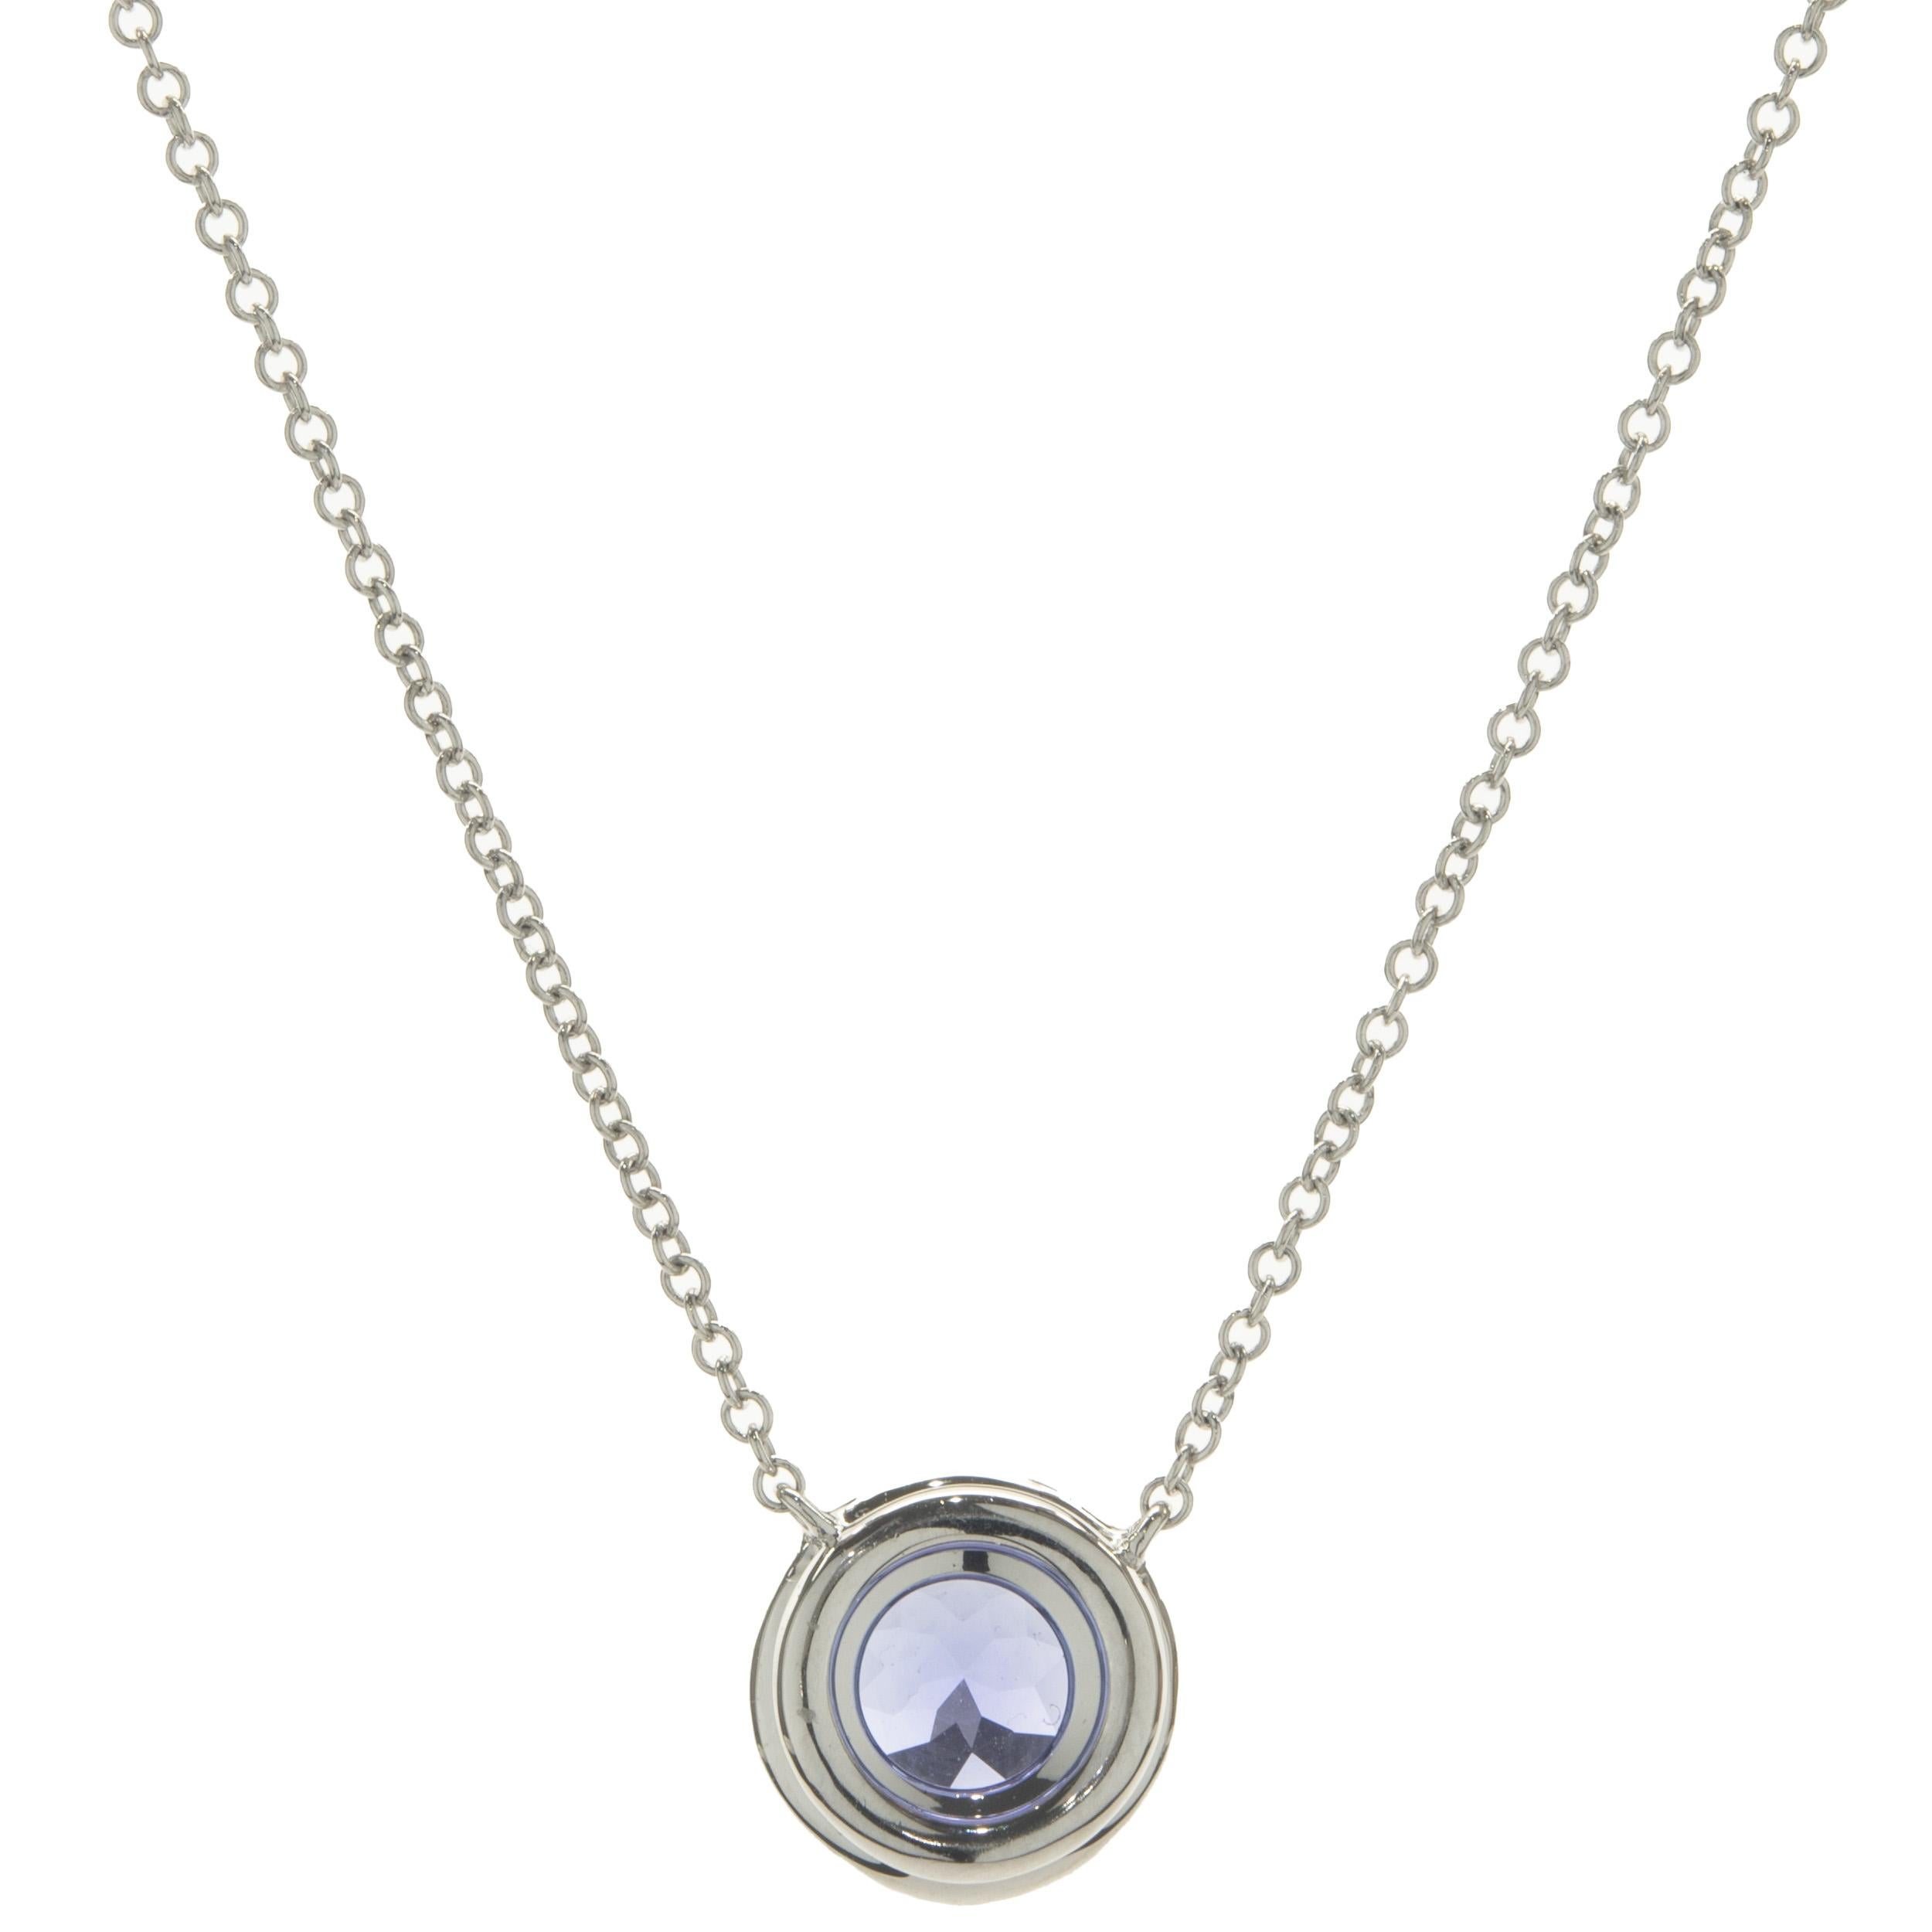 Designer: Tiffany & Co. 
Material: platinum
Diamond: round brilliant cut = 0.09cttw
Color: G
Clarity: VS2
Sapphire: 1 round cut = .40ct
Dimensions: necklace measures 16-inches 
Weight: 3.83 grams